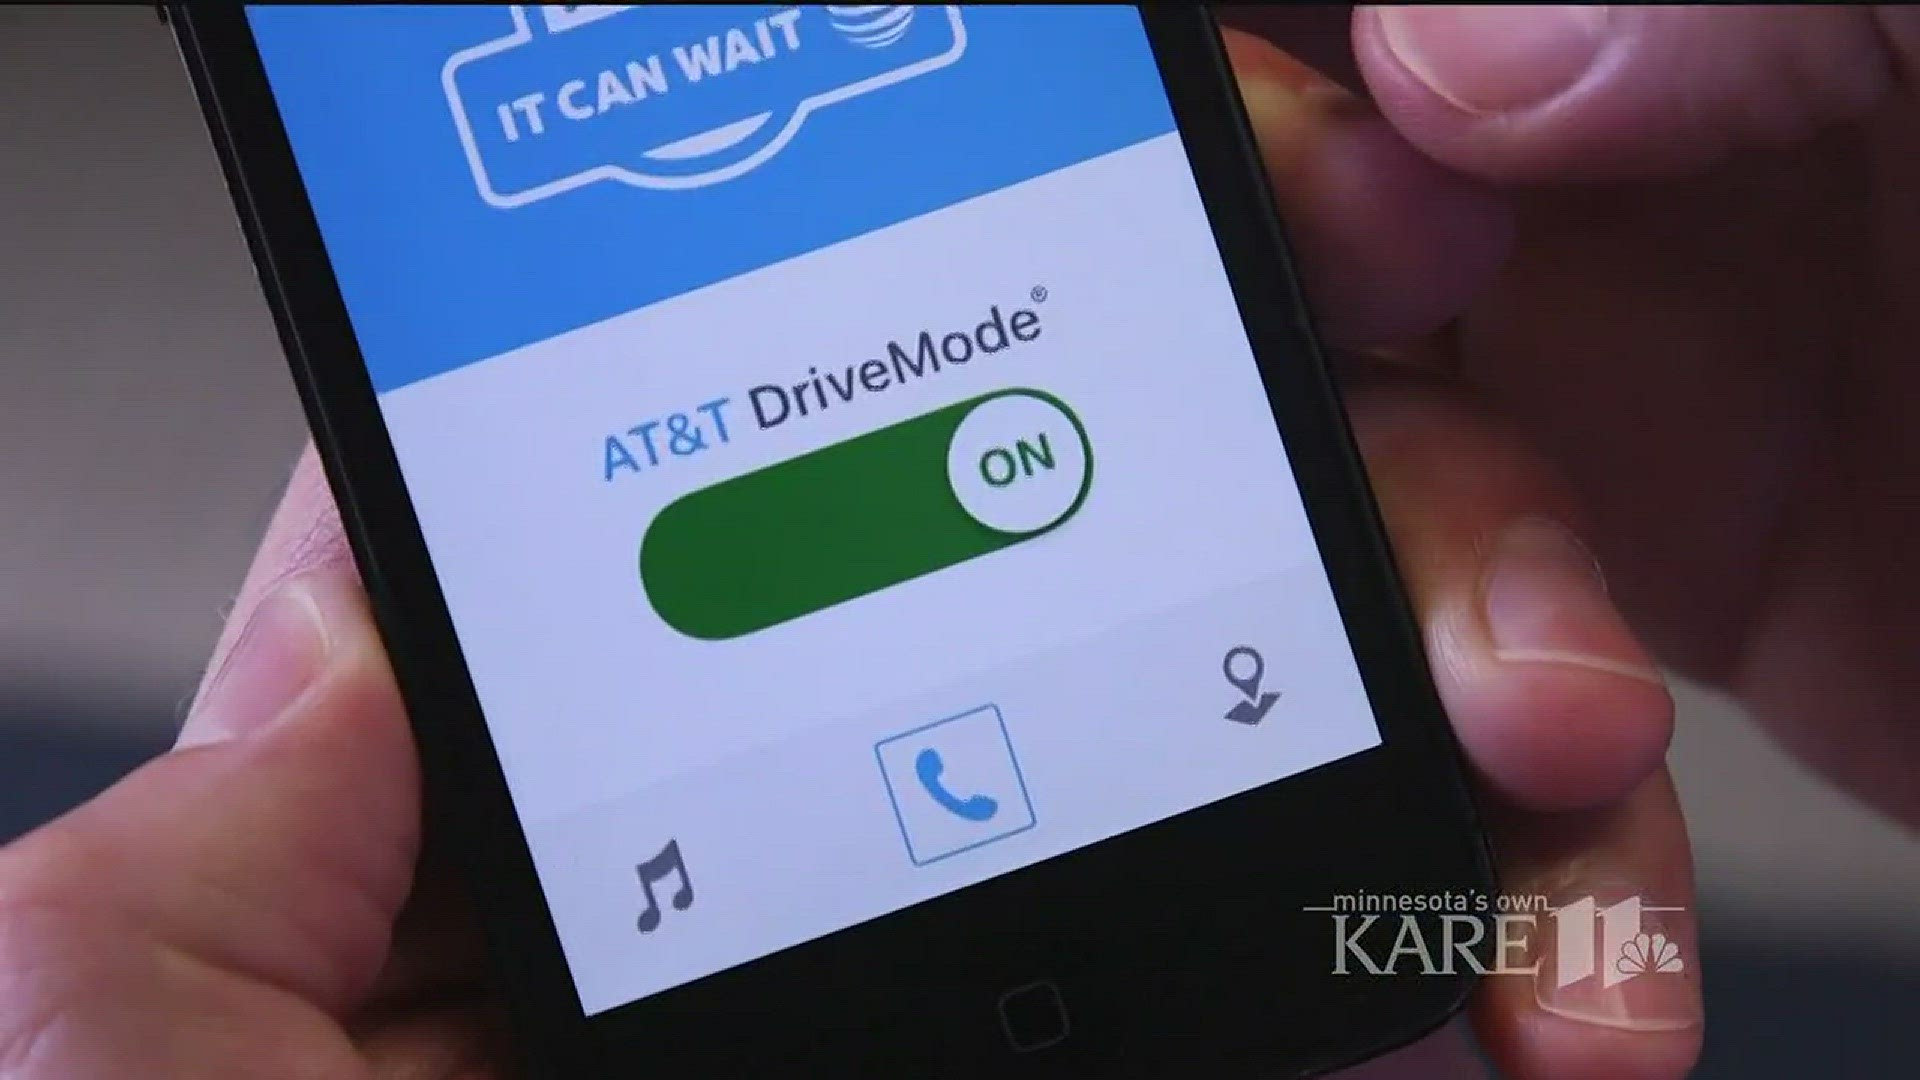 AT&T launched a smart phone app a few years ago that stops you from getting texts while driving. "The minute you hit going 15 miles an hour or faster, you no longer will receive text message notifications on your smart phone." http://kare11.tv/2txb5MA